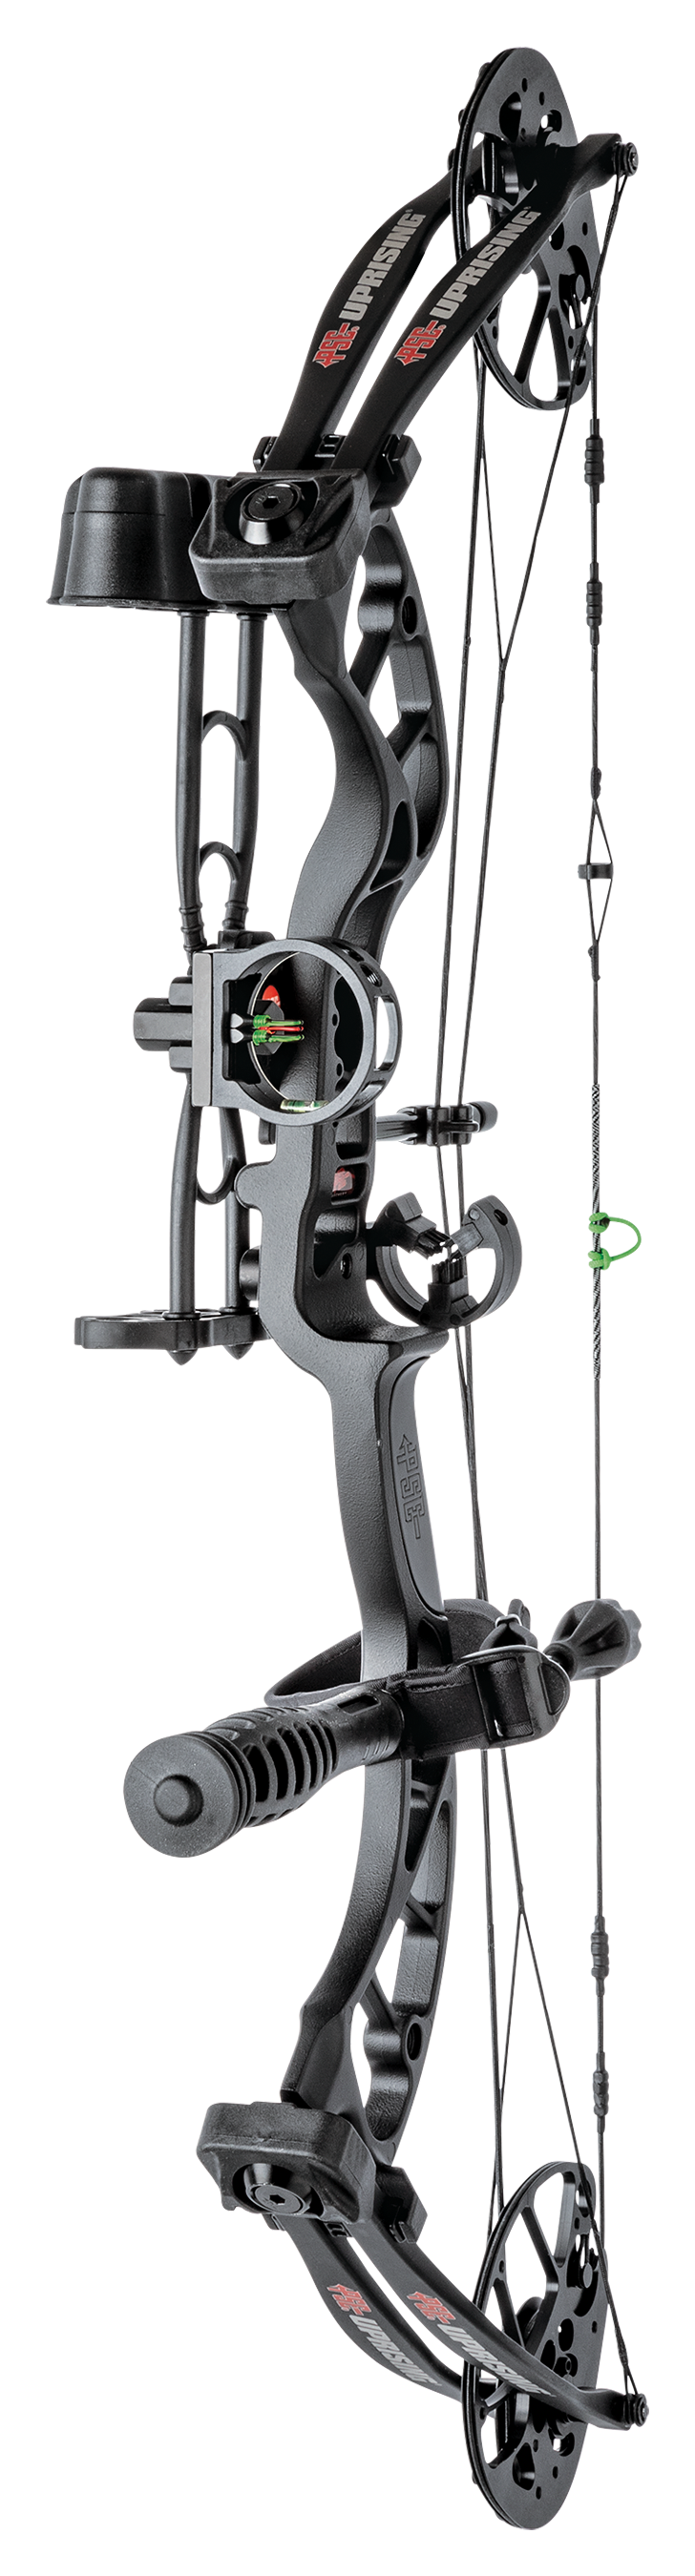 PSE Archery Uprising RTS Compound Bow Package - Black - Left Hand